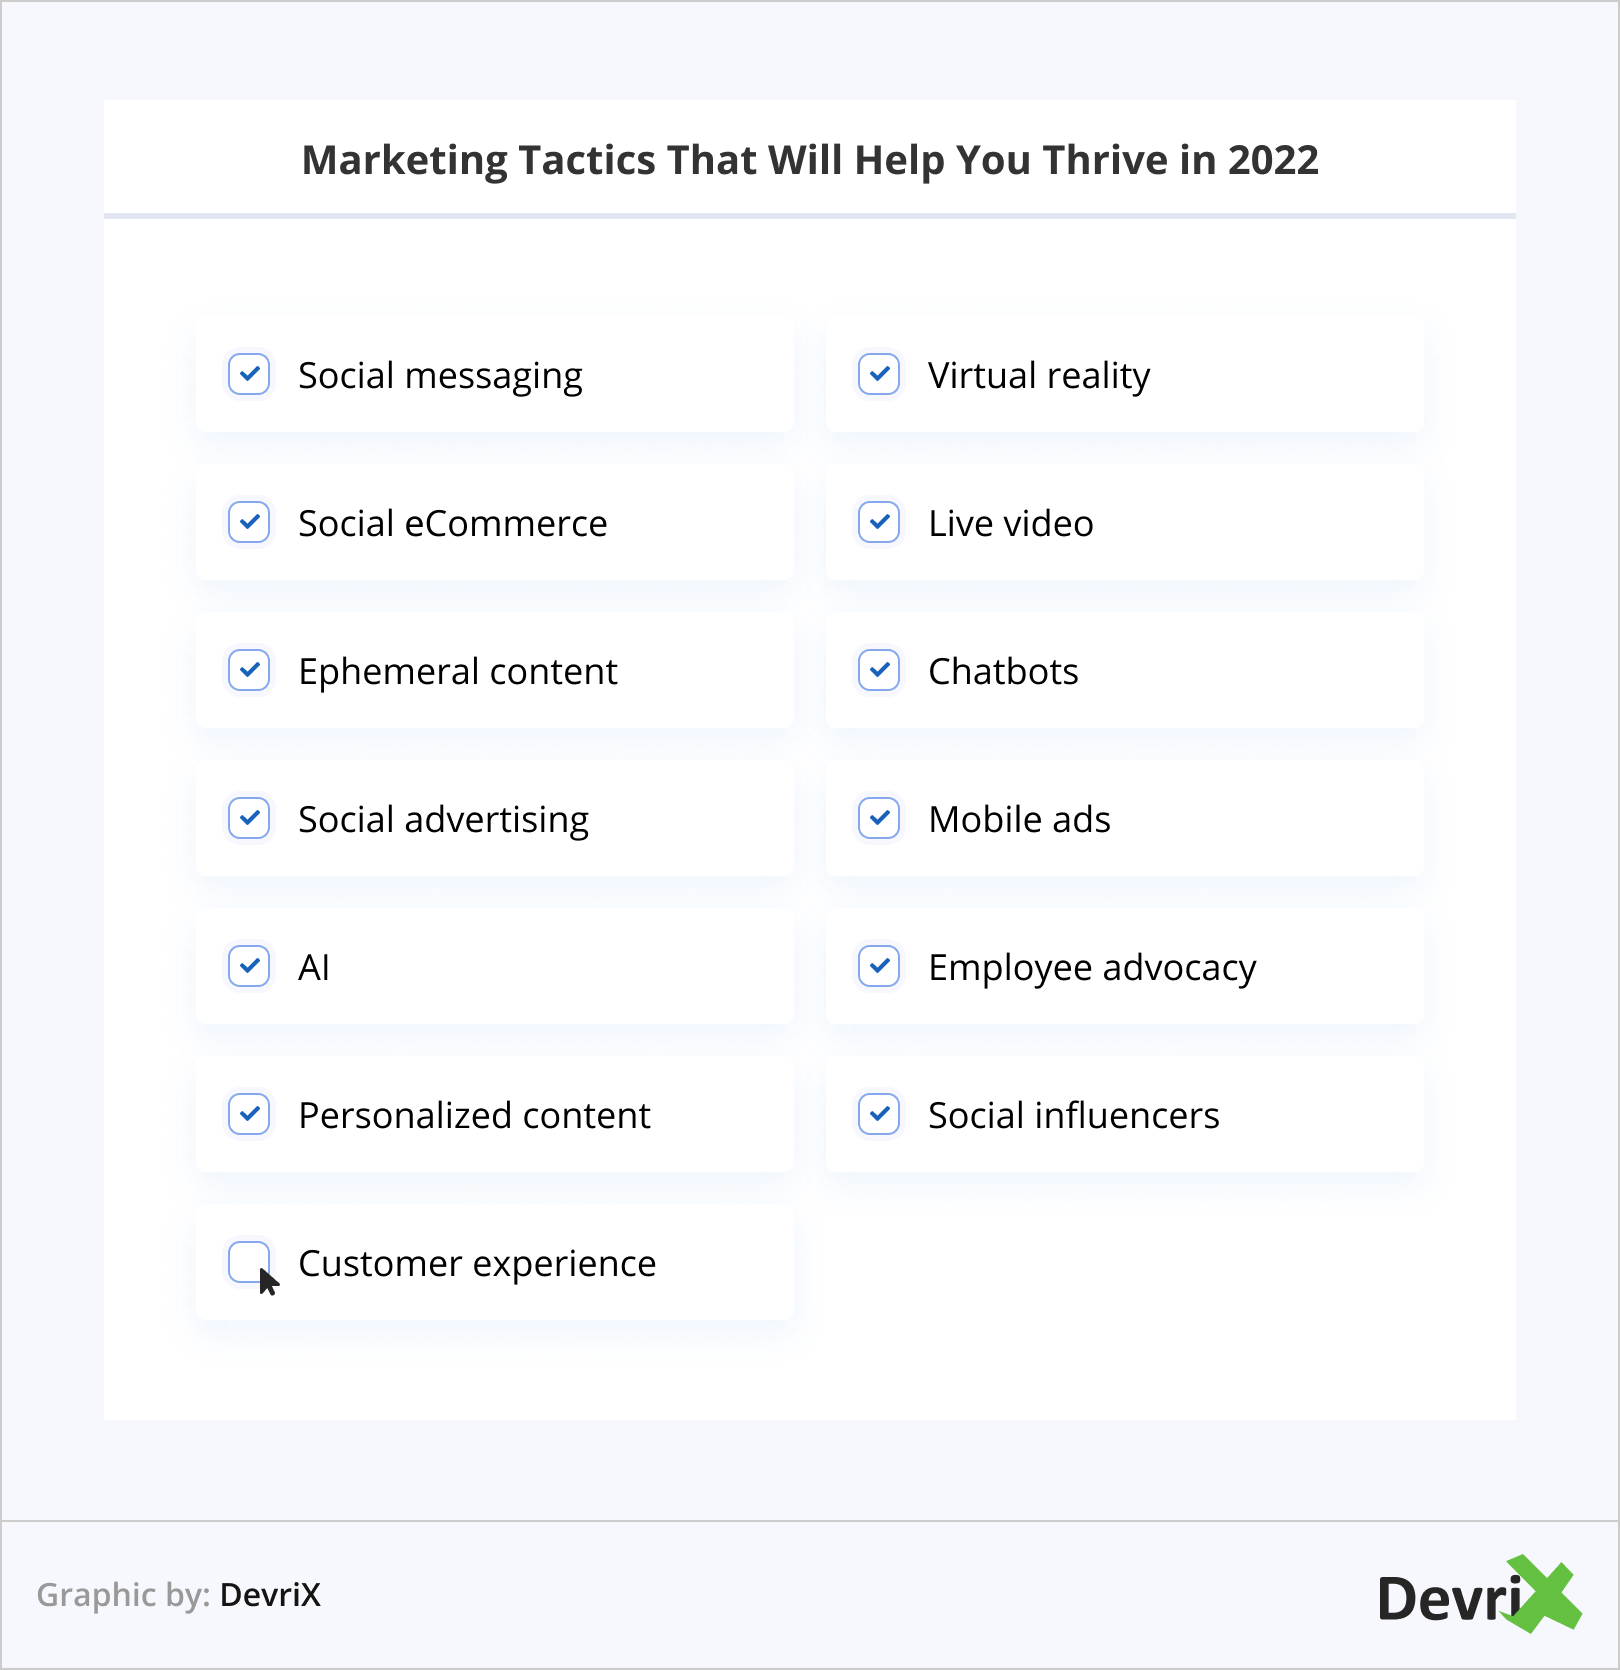 Marketing Tactics That Will Help You Thrive in 2022